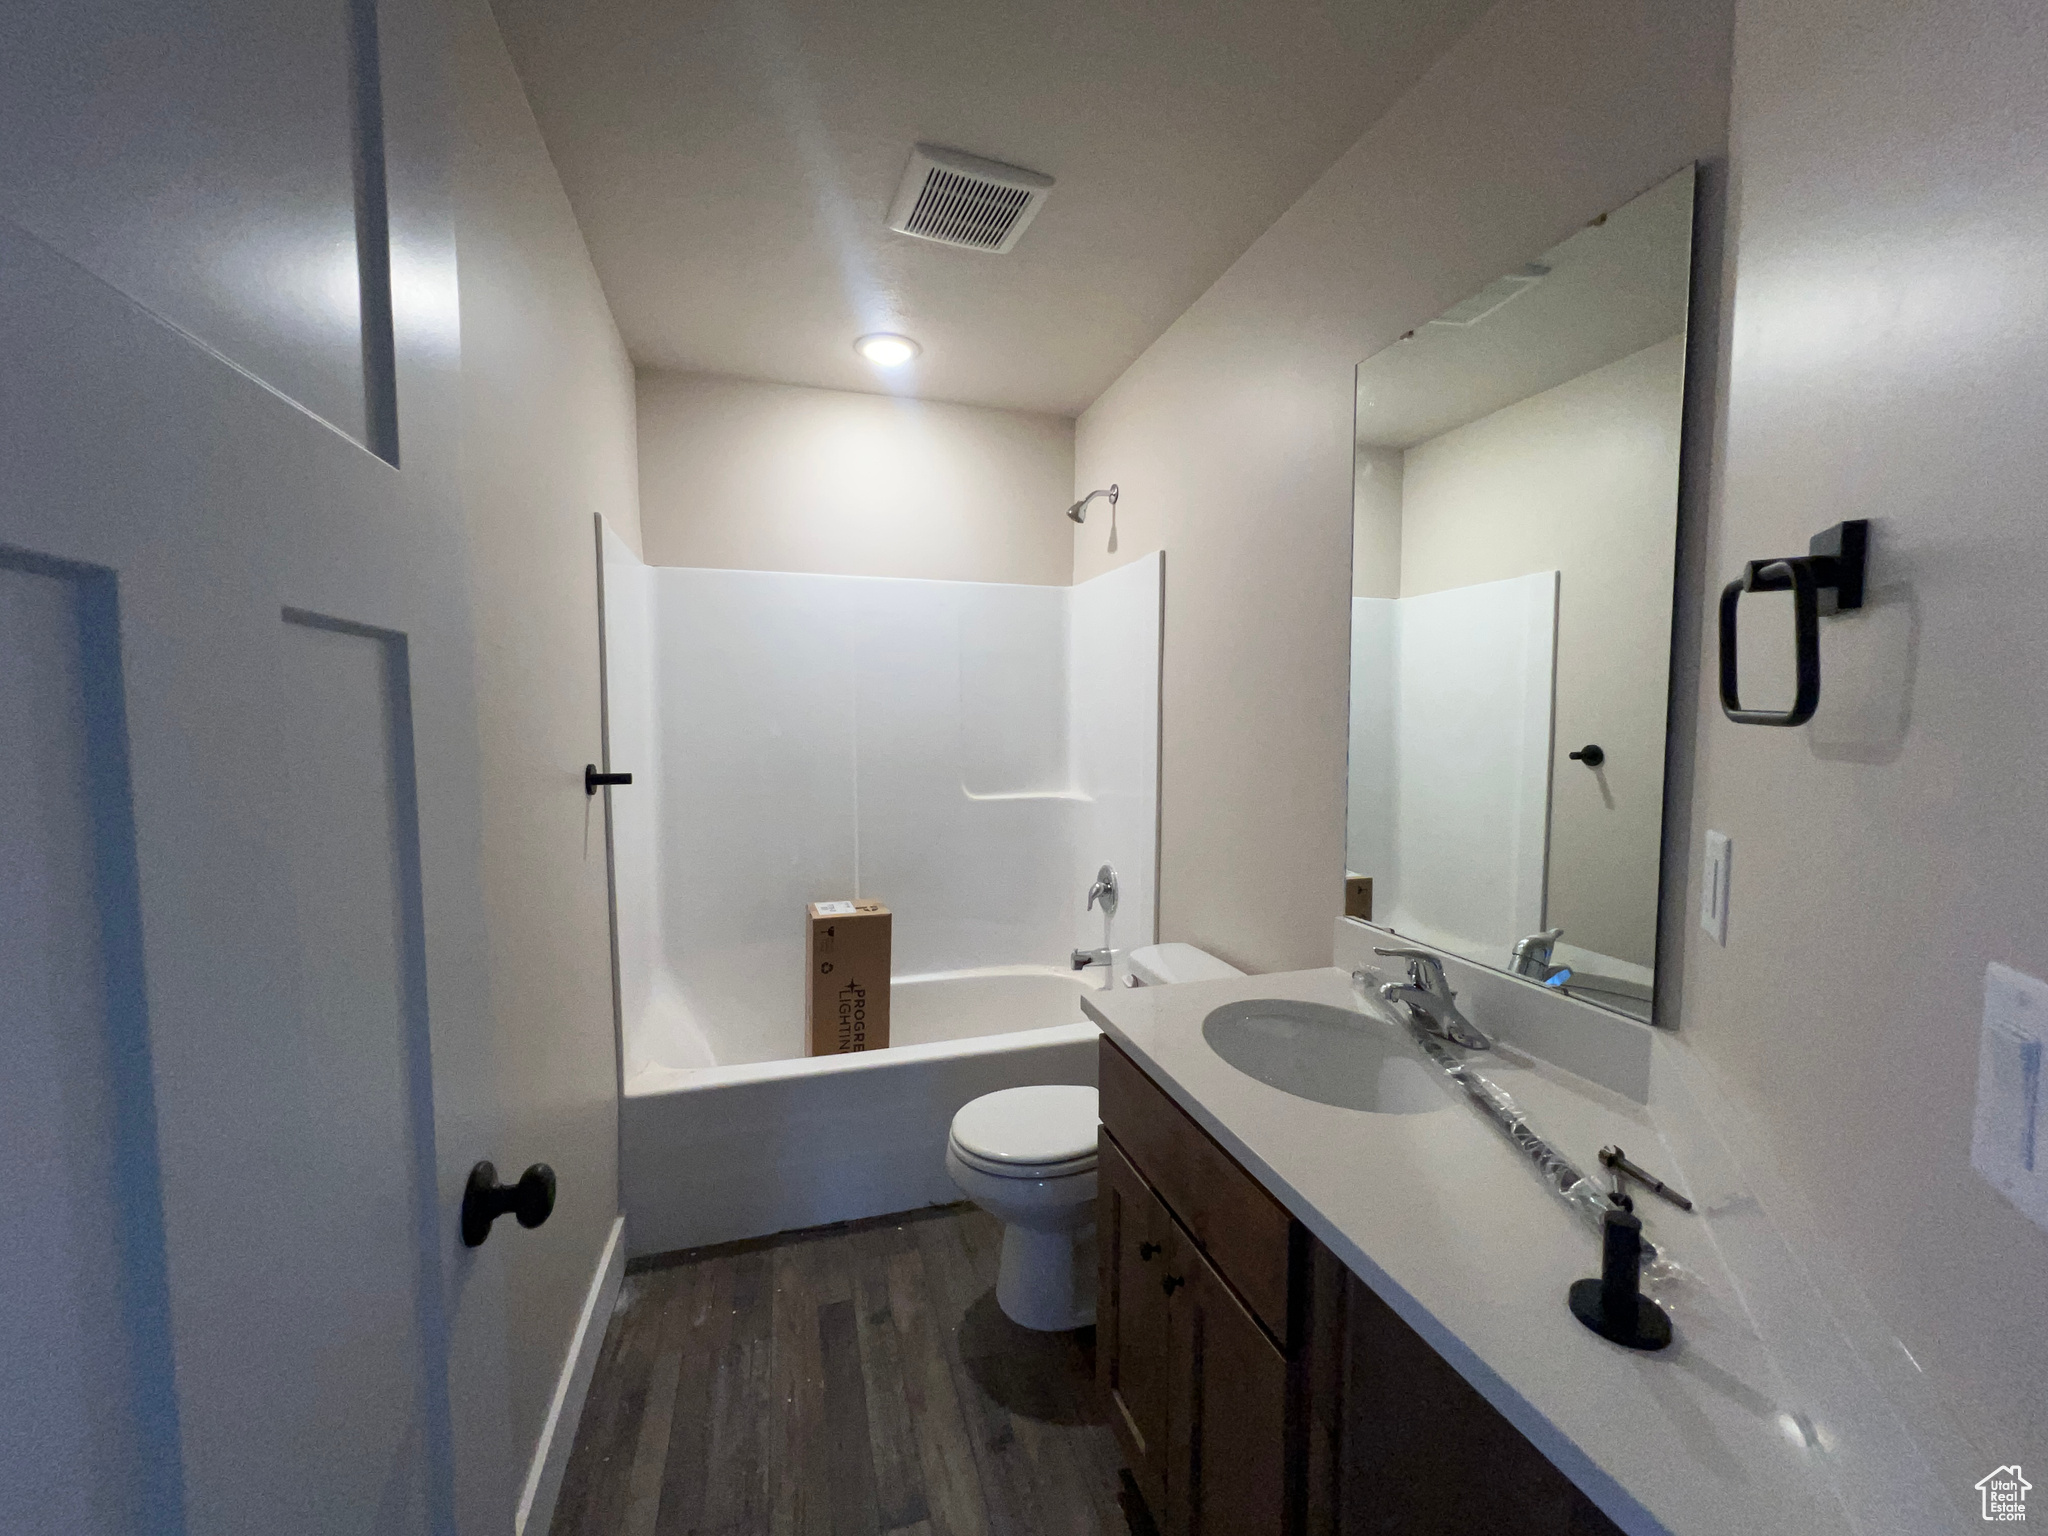 Full bathroom with vanity with extensive cabinet space, hardwood / wood-style flooring, toilet, and  shower combination